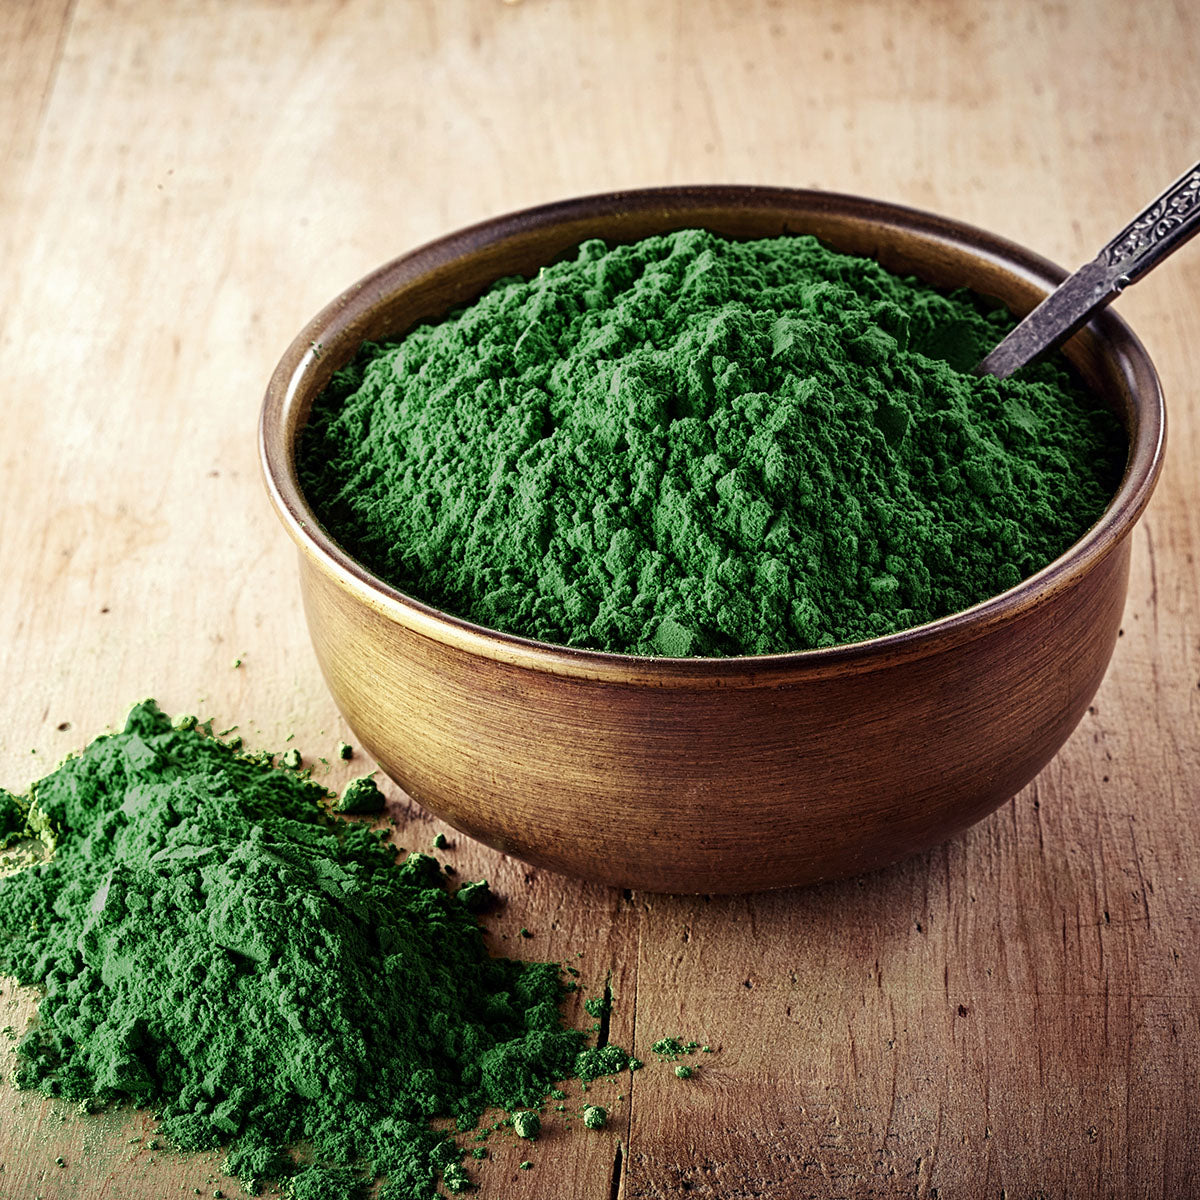 How To Effectively Detox From These Hidden Everyday Toxins with Chlorella